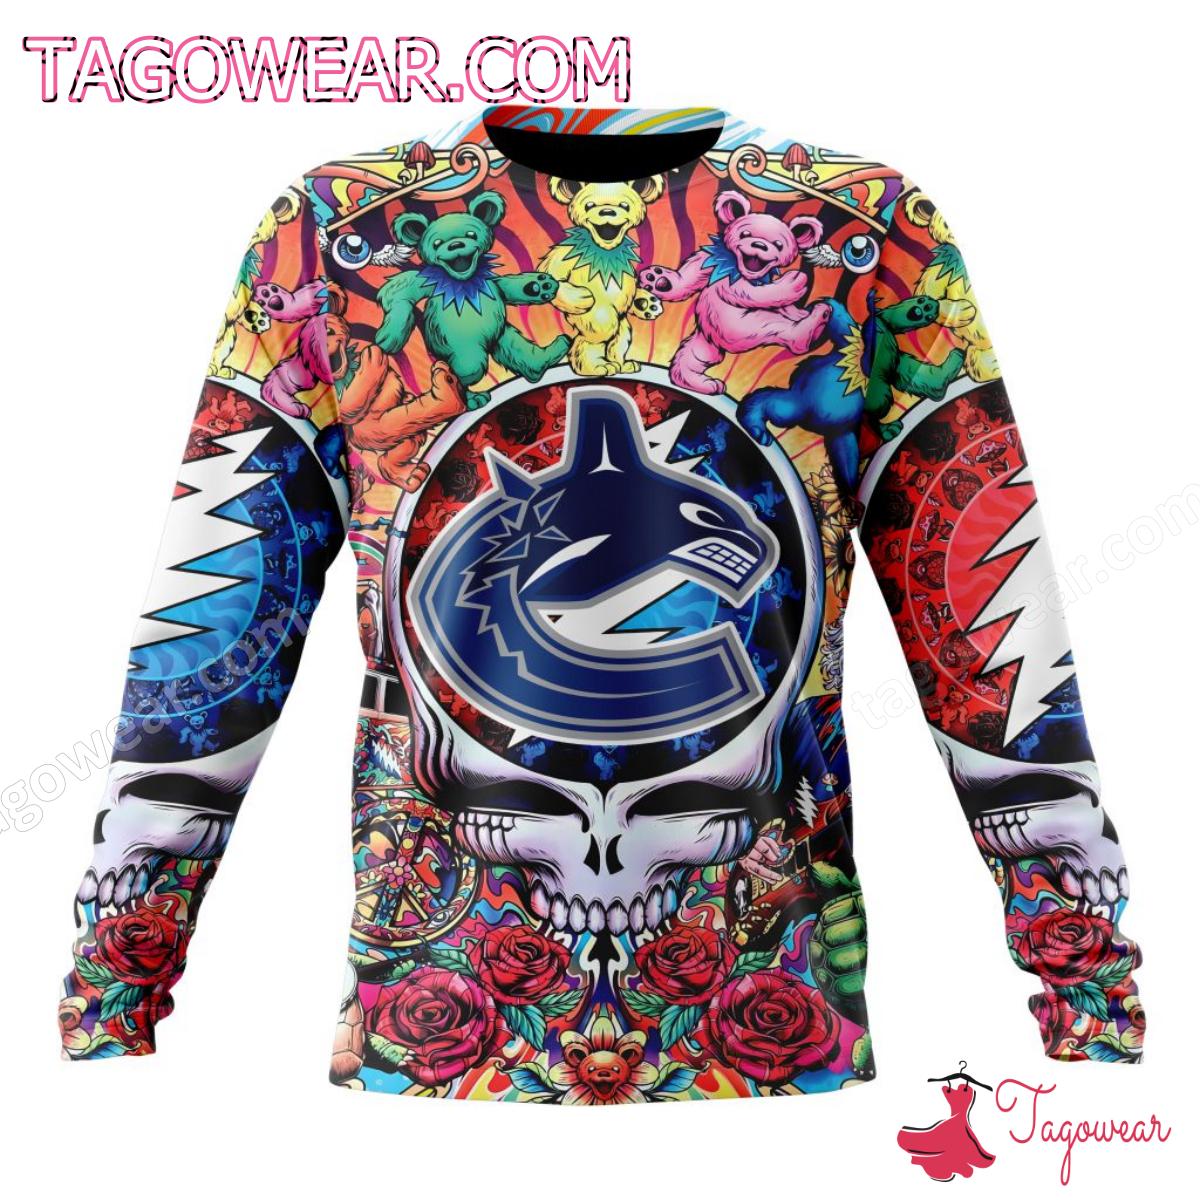 NHL Vancouver Canucks Grateful Dead Dancing Bears Personalized T-shirt, Hoodie b